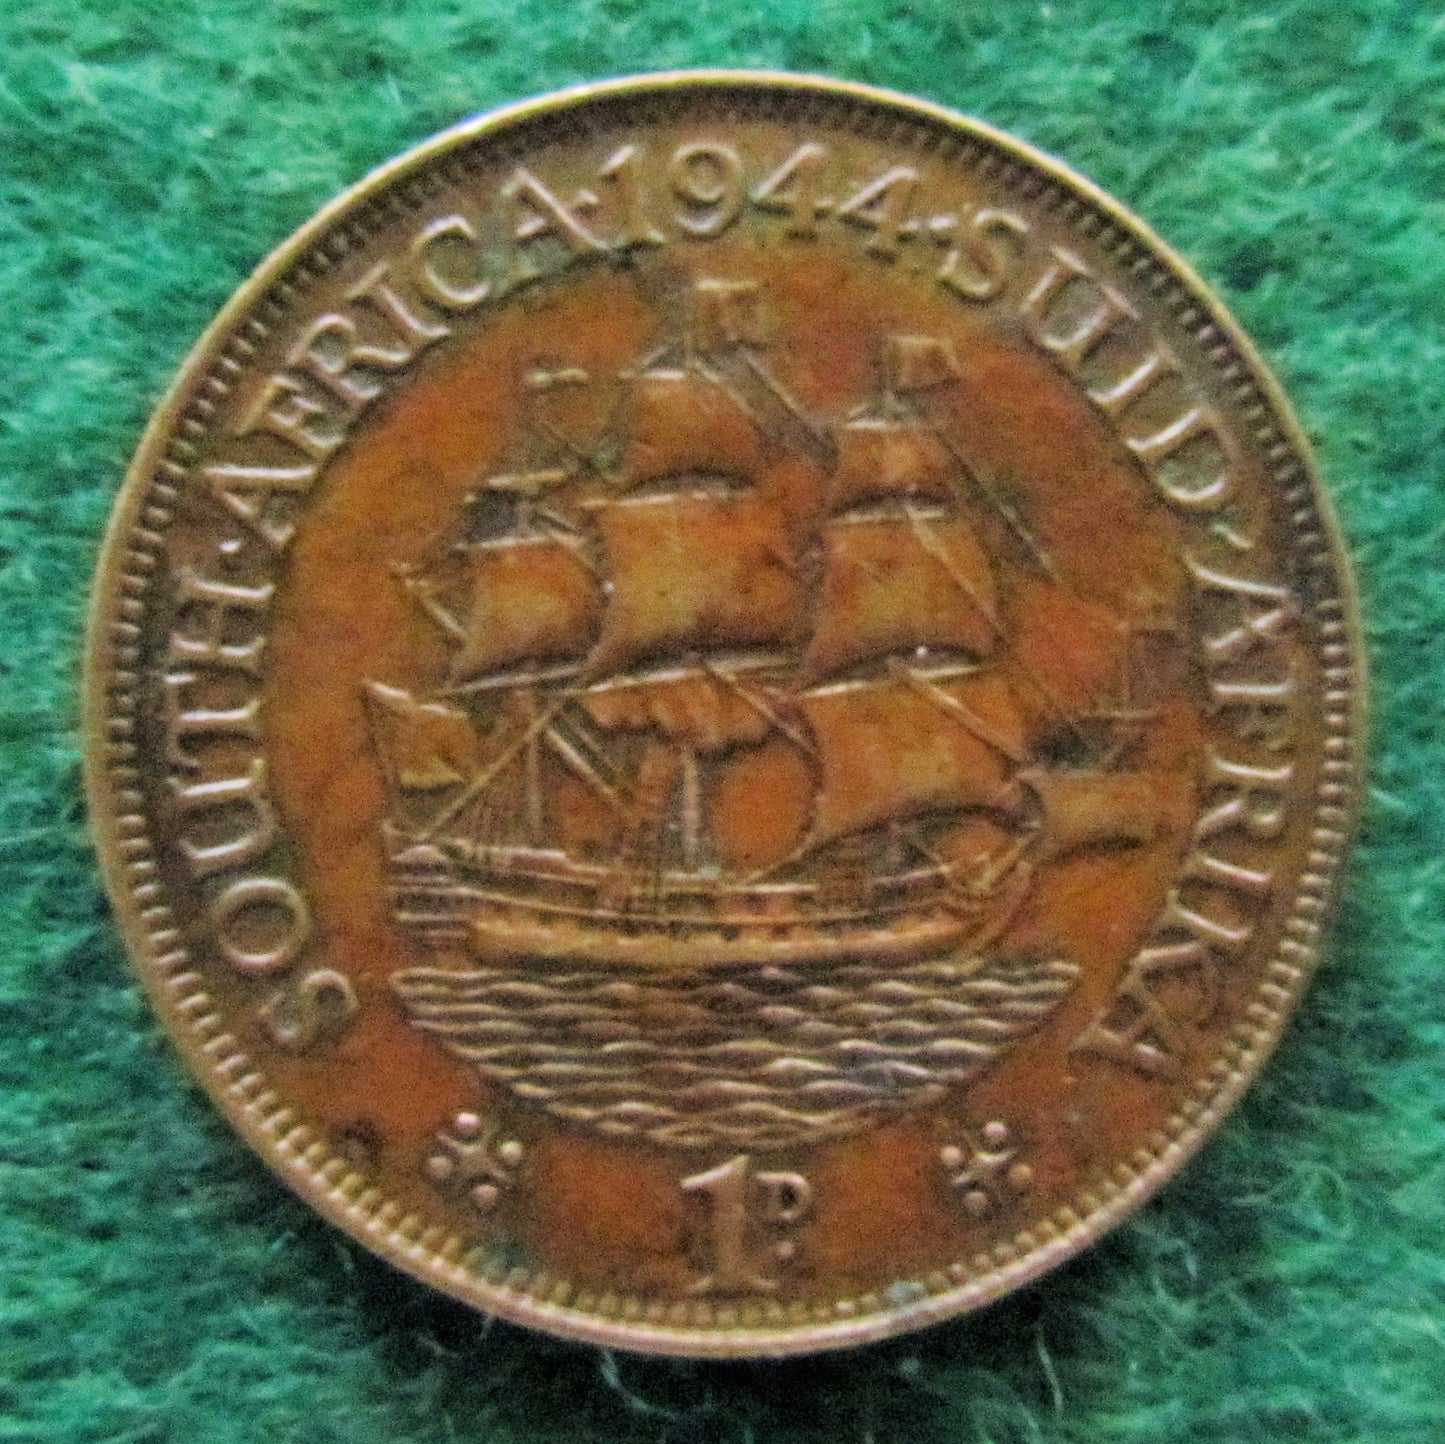 South Africa 1944 1 Penny Coin